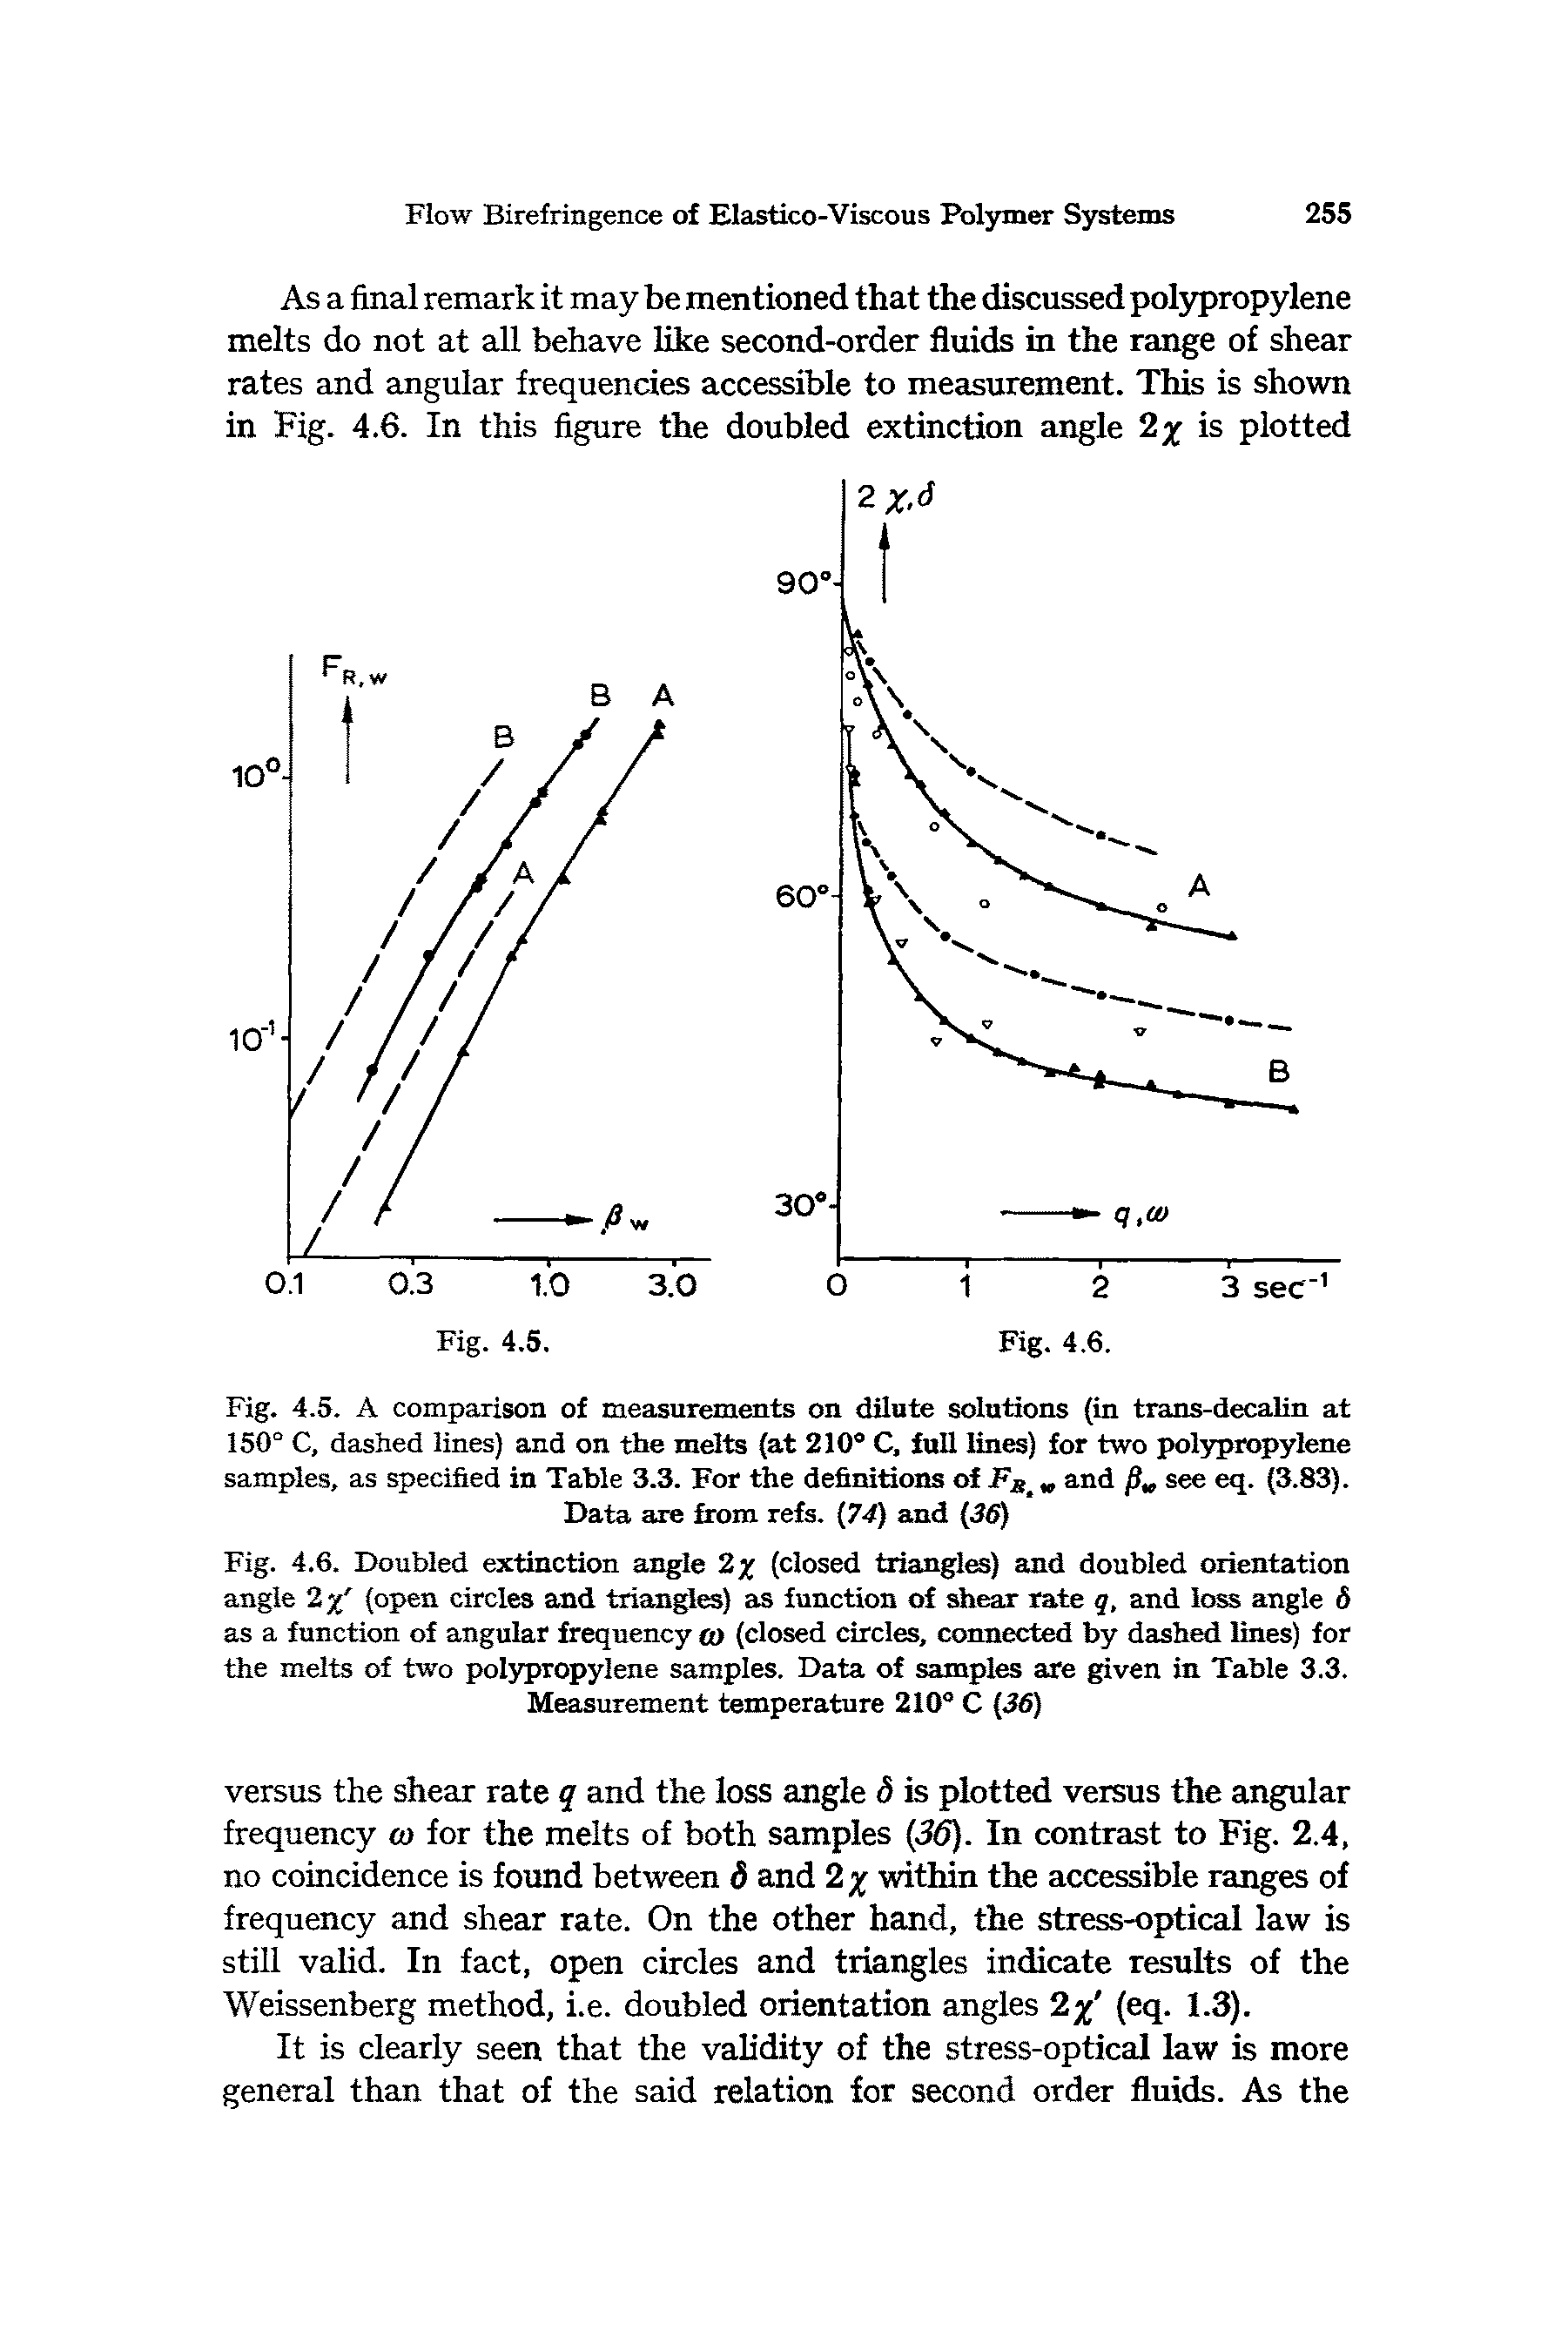 Fig. 4.6. Doubled extinction angle 2y (closed triangles) and doubled orientation angle 2% (open circles and triangles) as function of shear rate q, and loss angle 6 as a function of angular frequency (closed circles, connected by dashed lines) for the melts of two polypropylene samples. Data of samples are given in Table 3.3. Measurement temperature 210° C (36)...